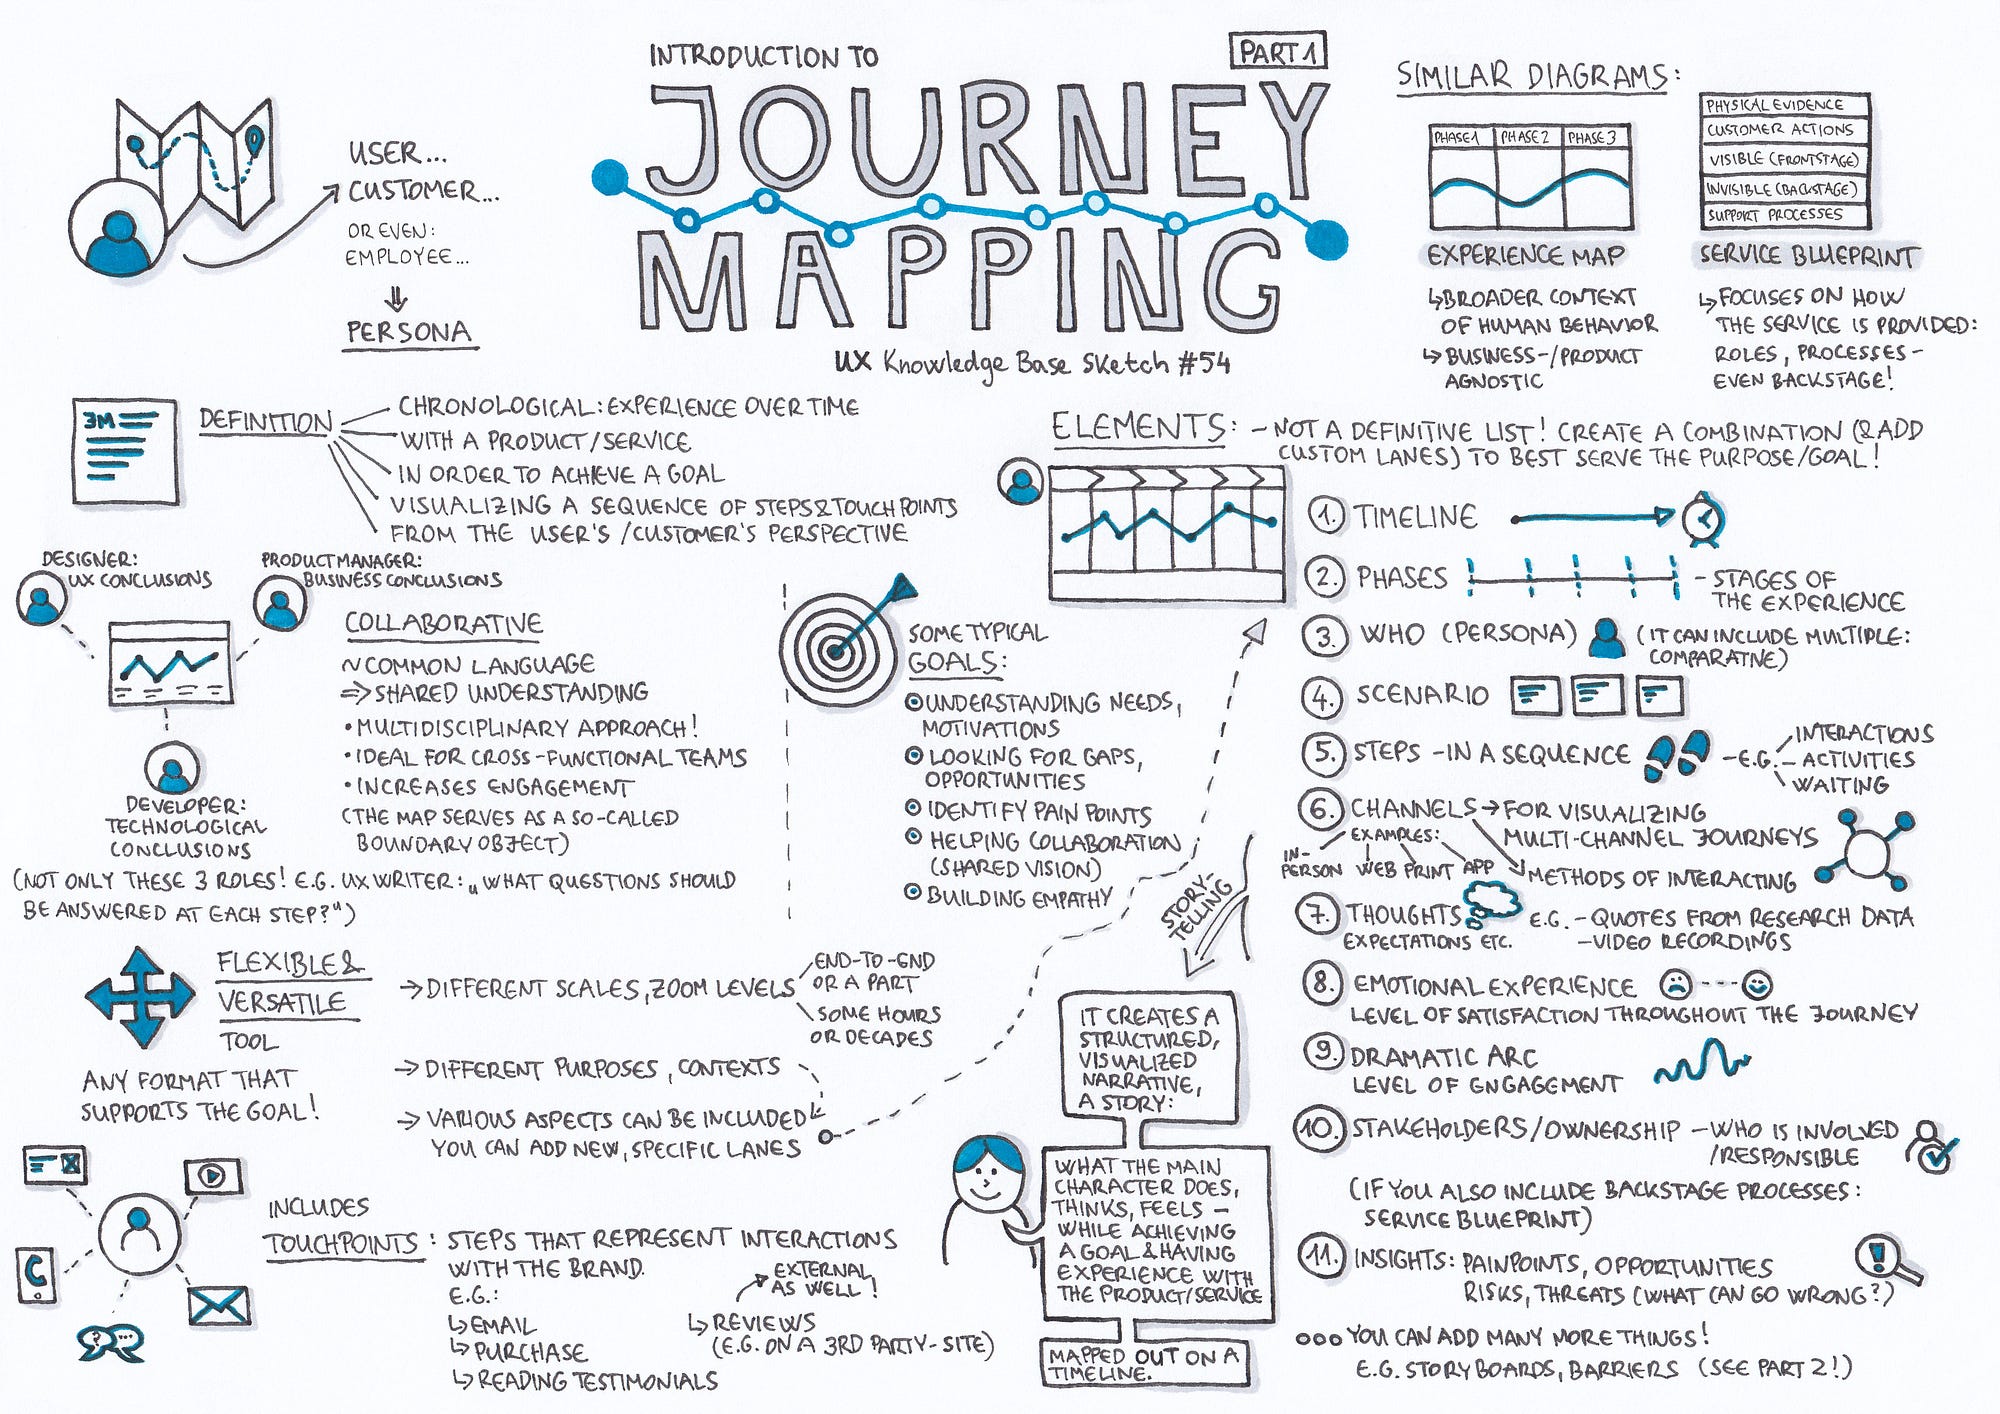 journey map from UX article in medium